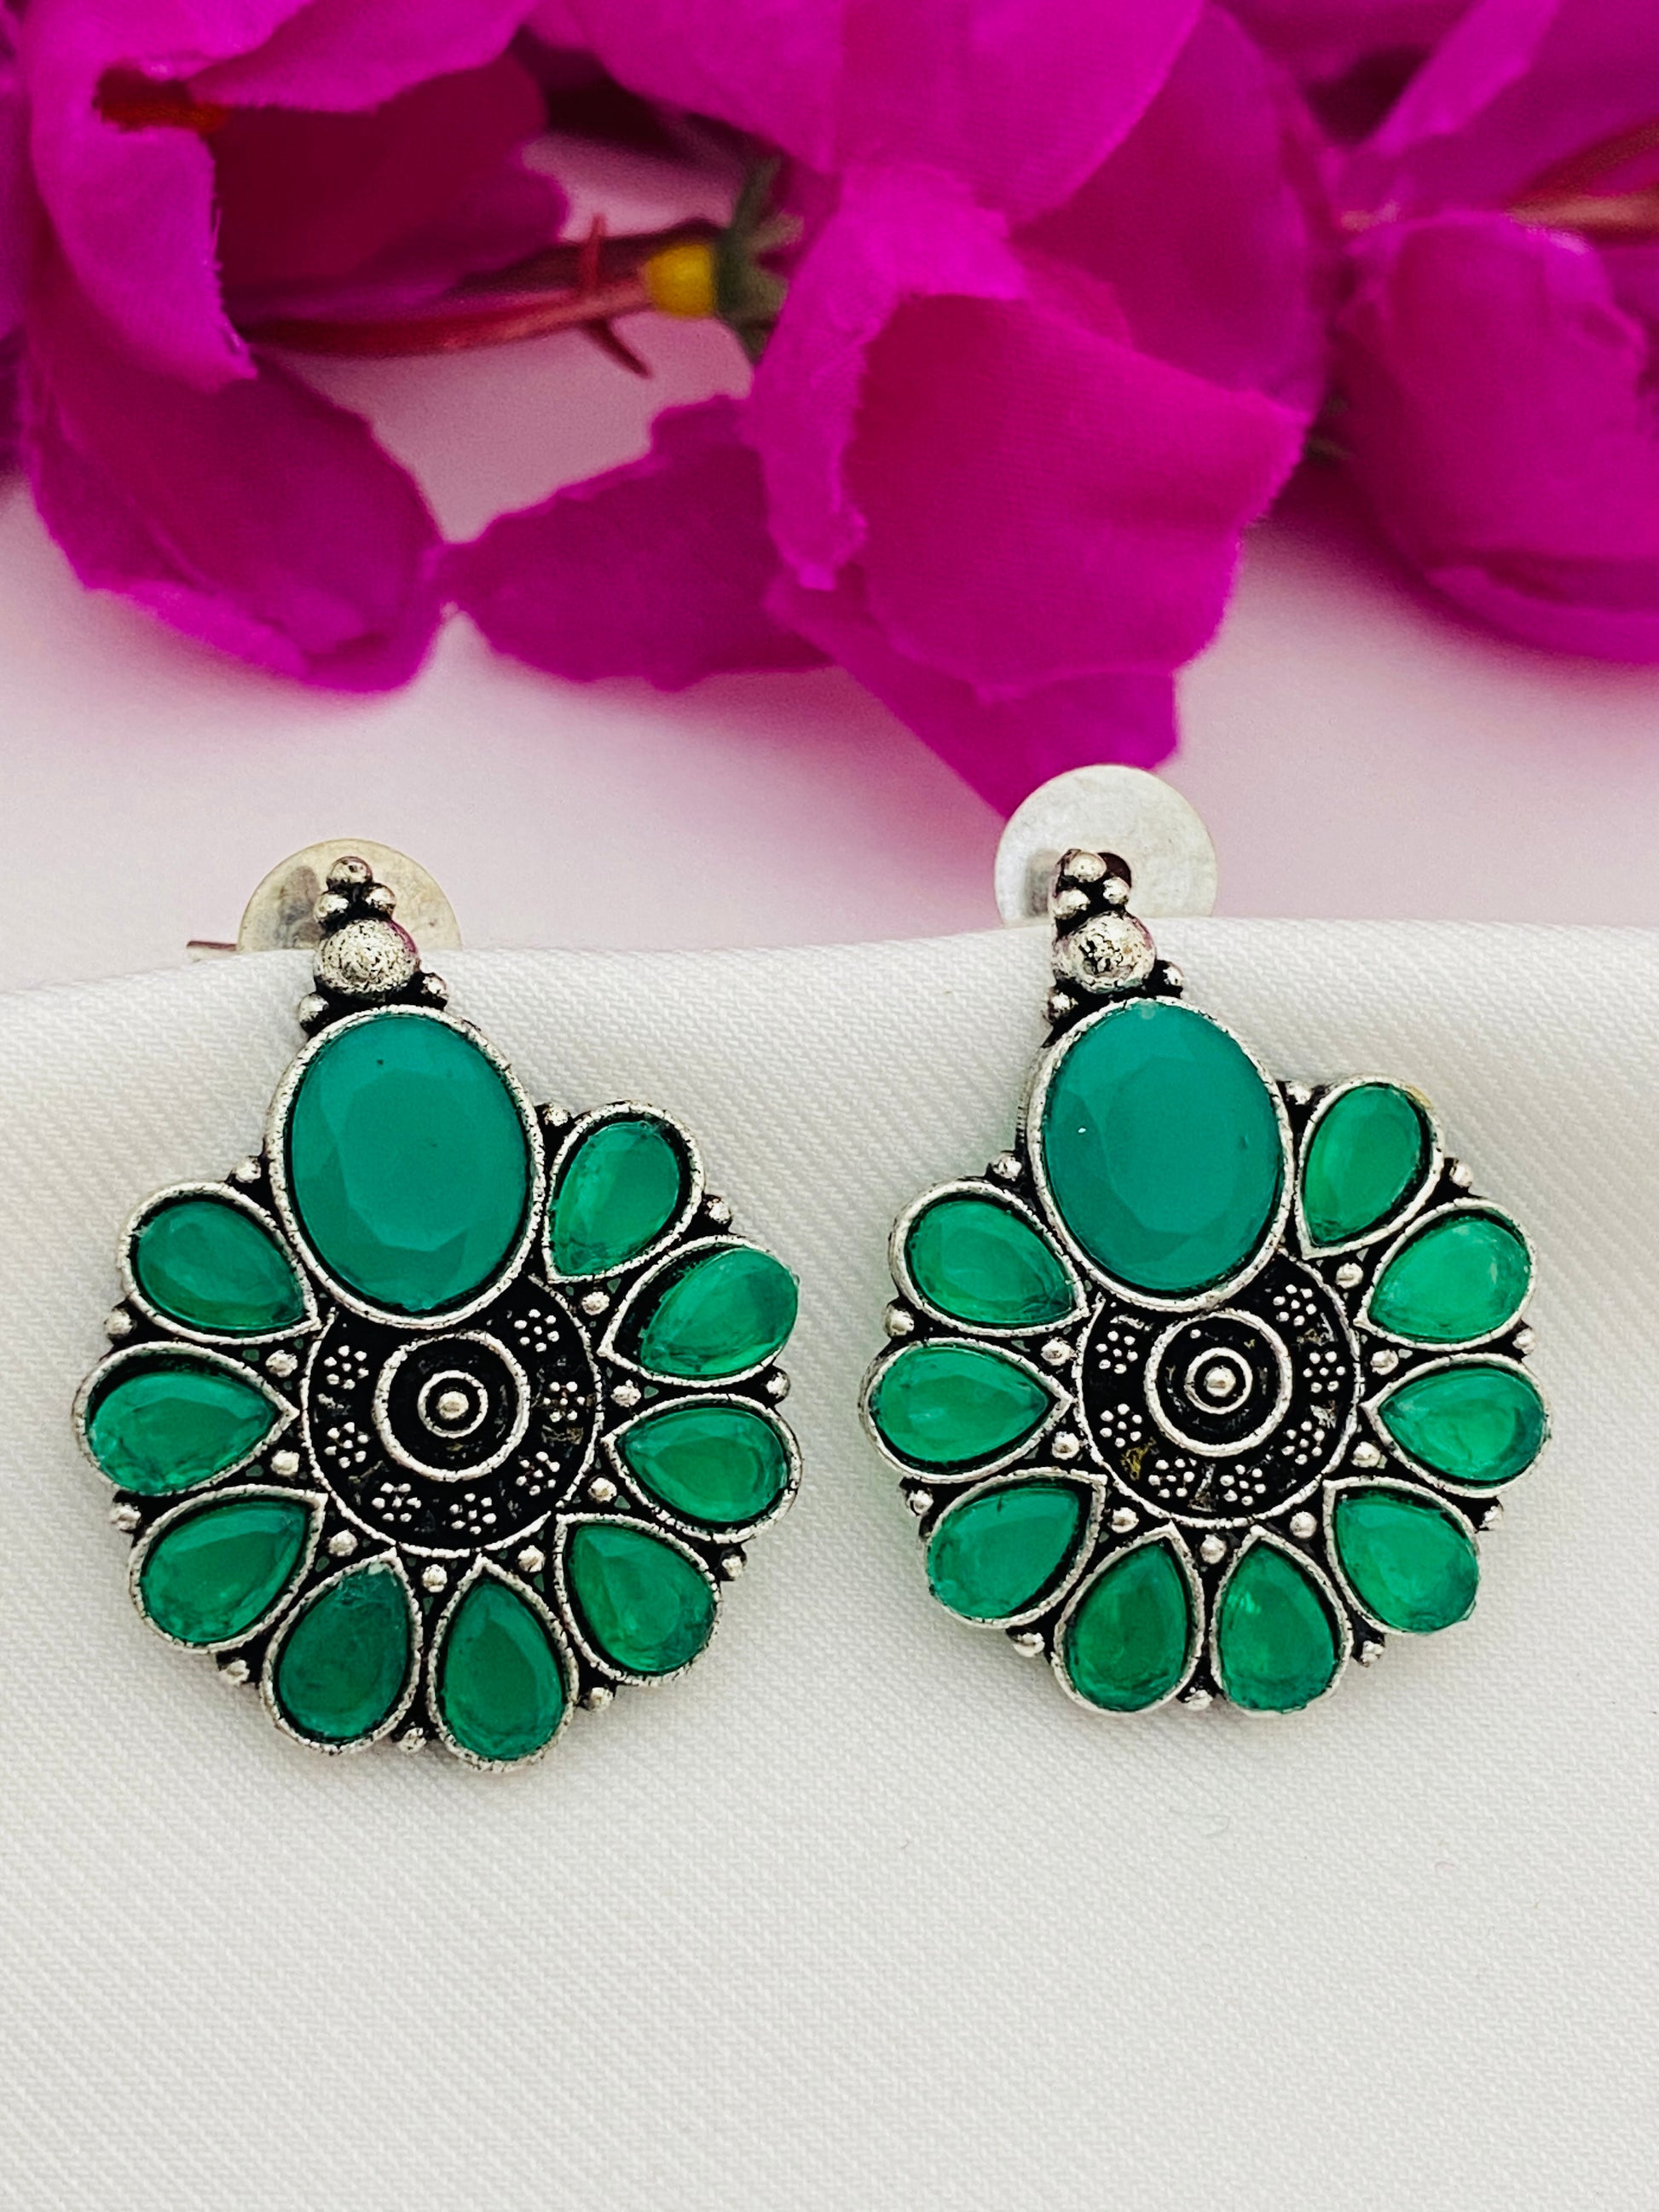 Dazzling Emerald Color Blossom Floral Designed Antique Finish Sterling Silver Oxidized Stud Earrings